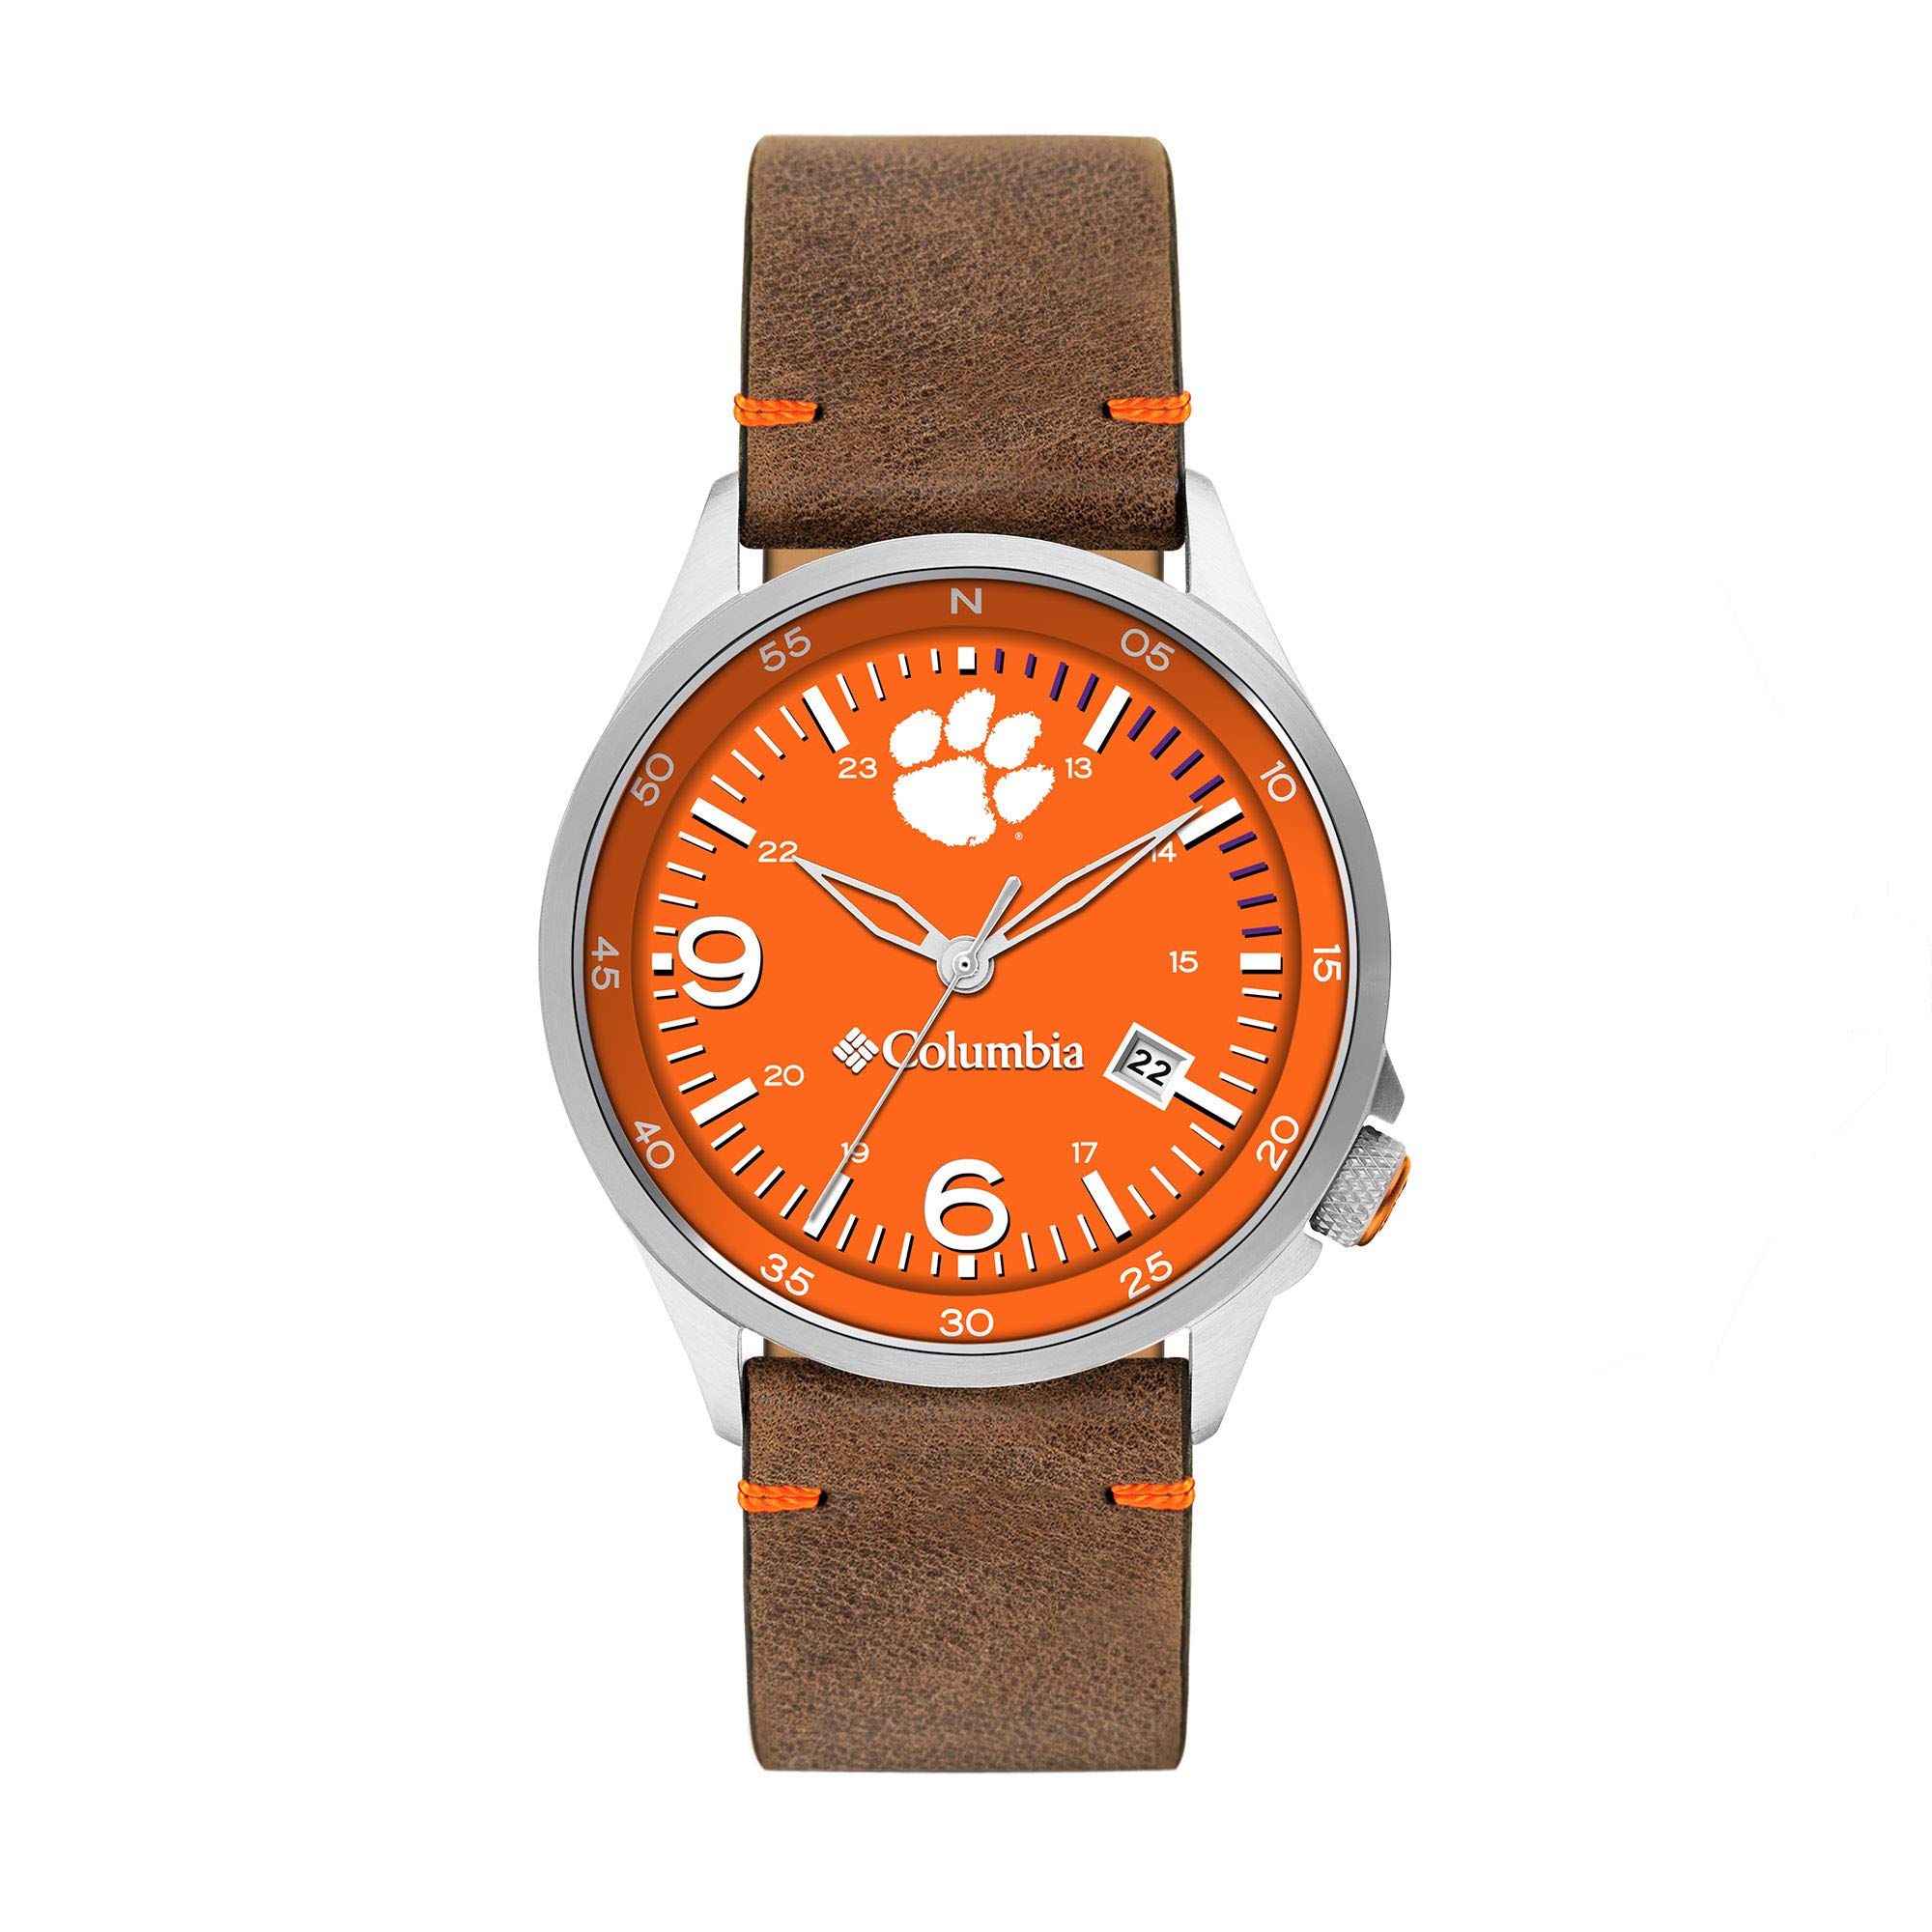 Columbia Canyon Ridge Clemson Tigers Men's Watch with Saddle Color Leather Strap